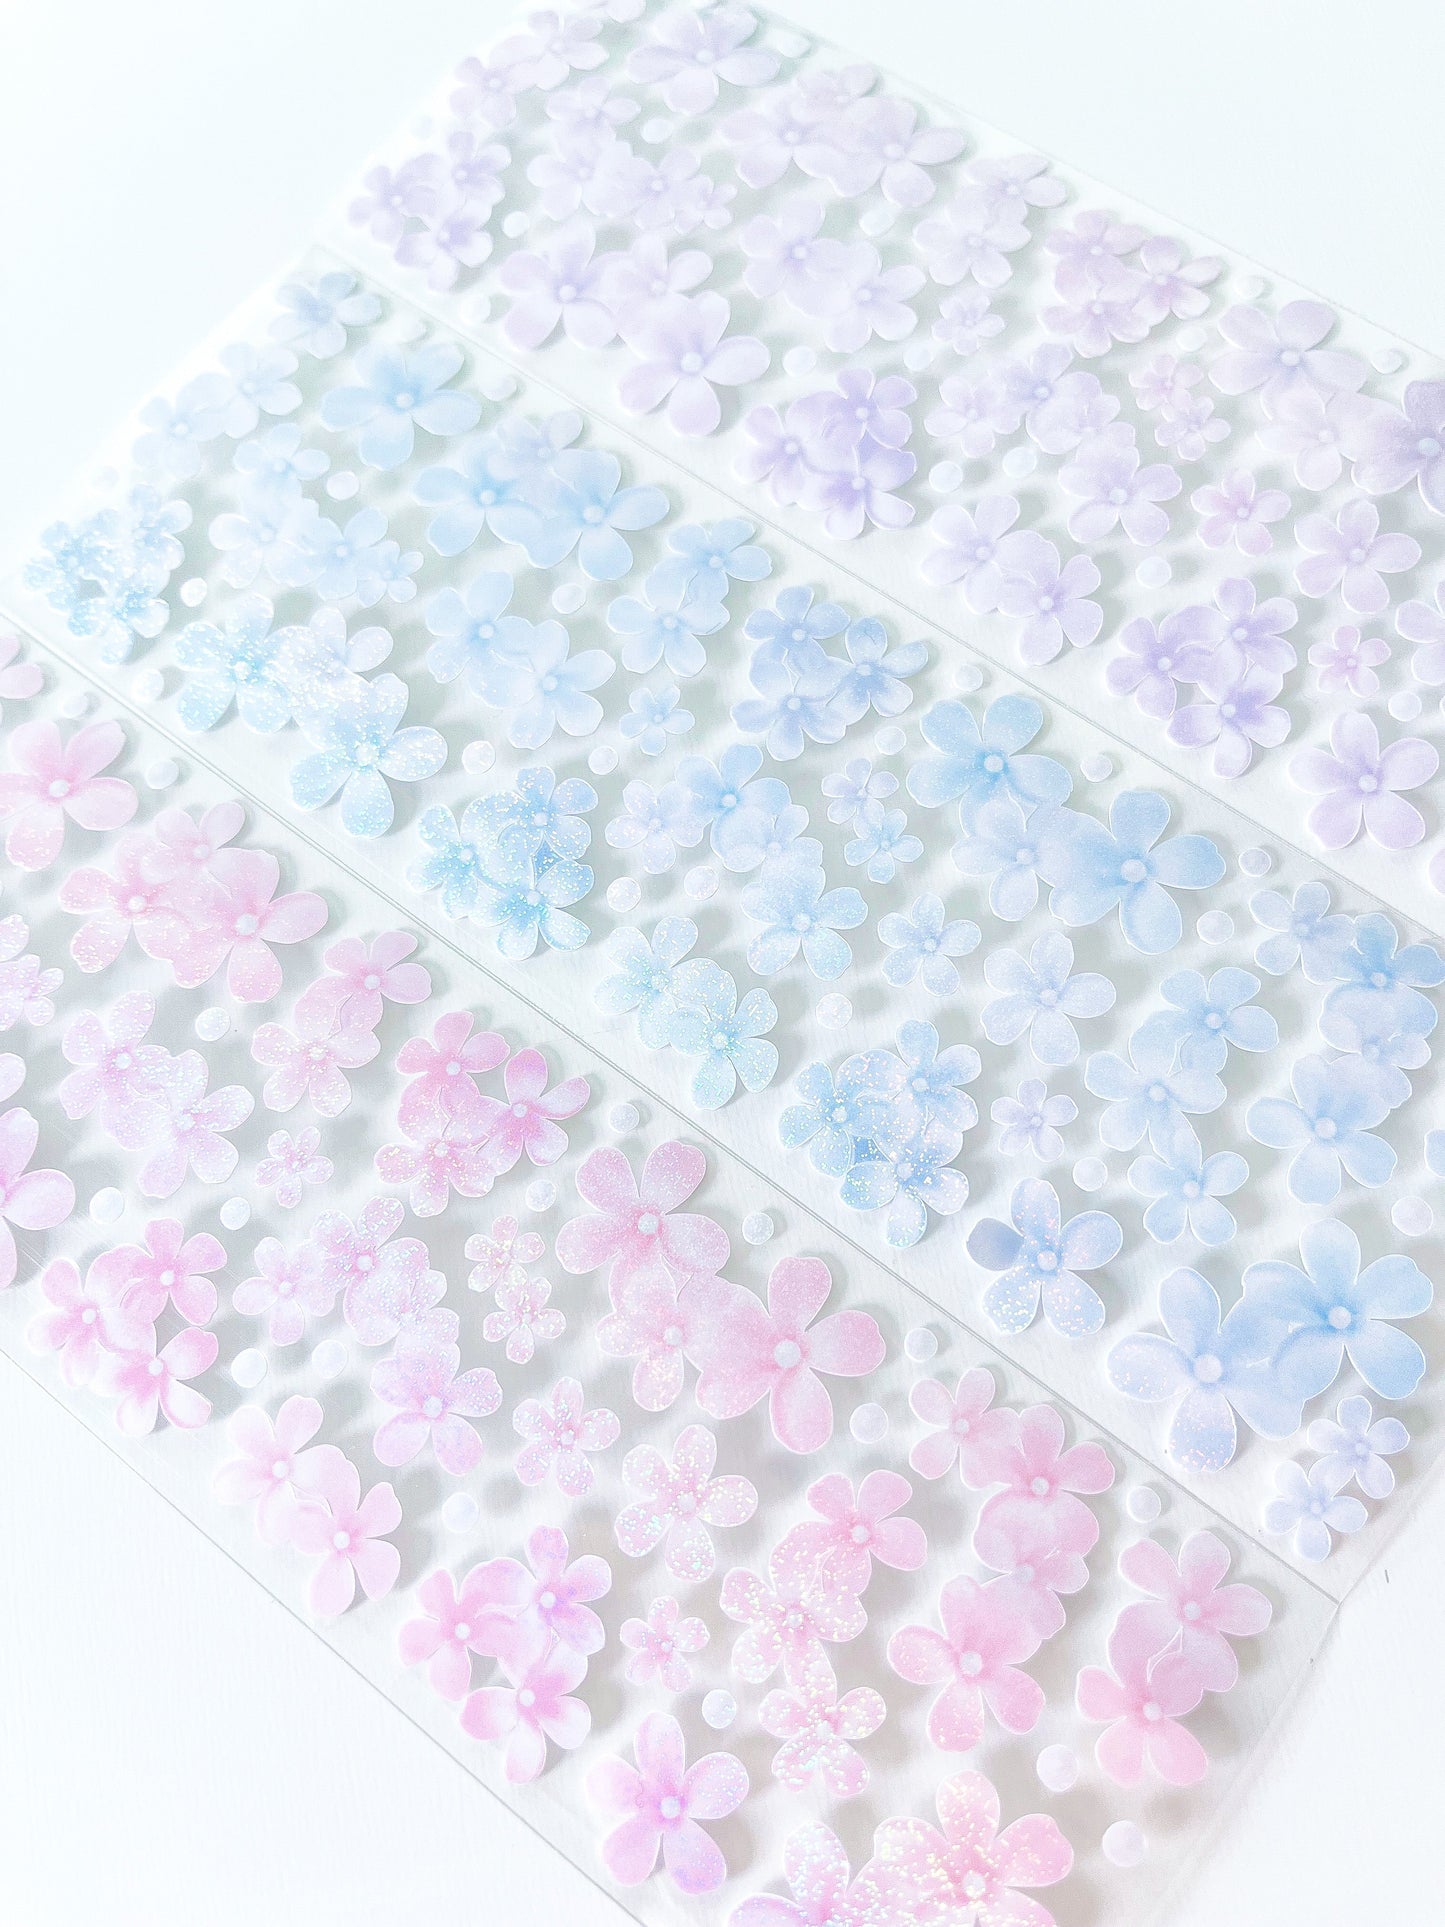 [borahstudio] Flowers in Bloom (Daylight) : Forget Me Not Collection